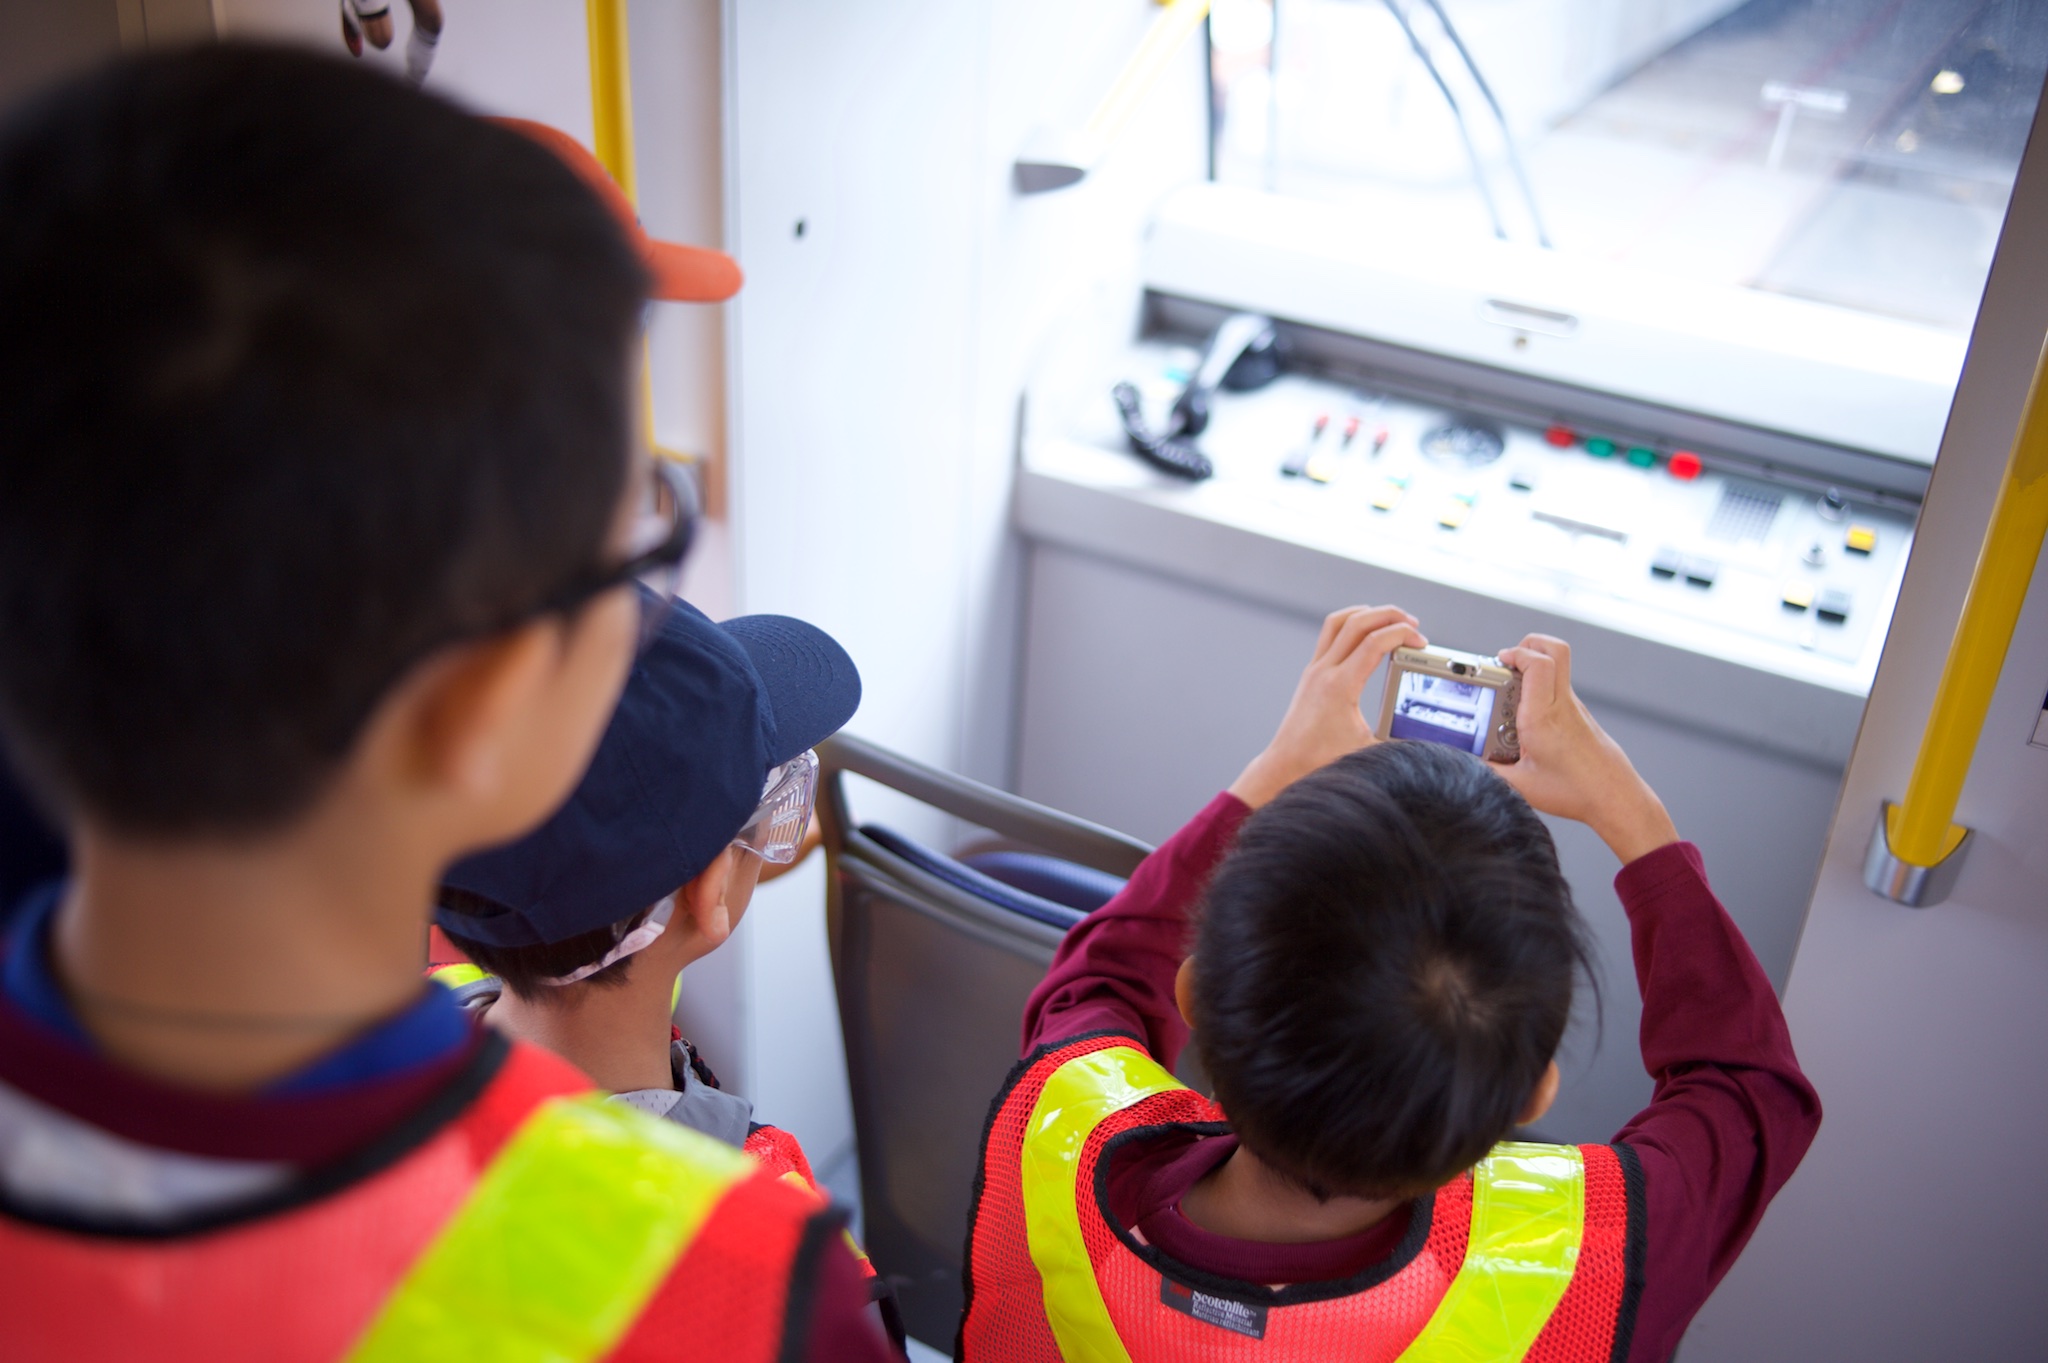 Campers rode a SkyTrain in the yard and got to see the manual control panel!